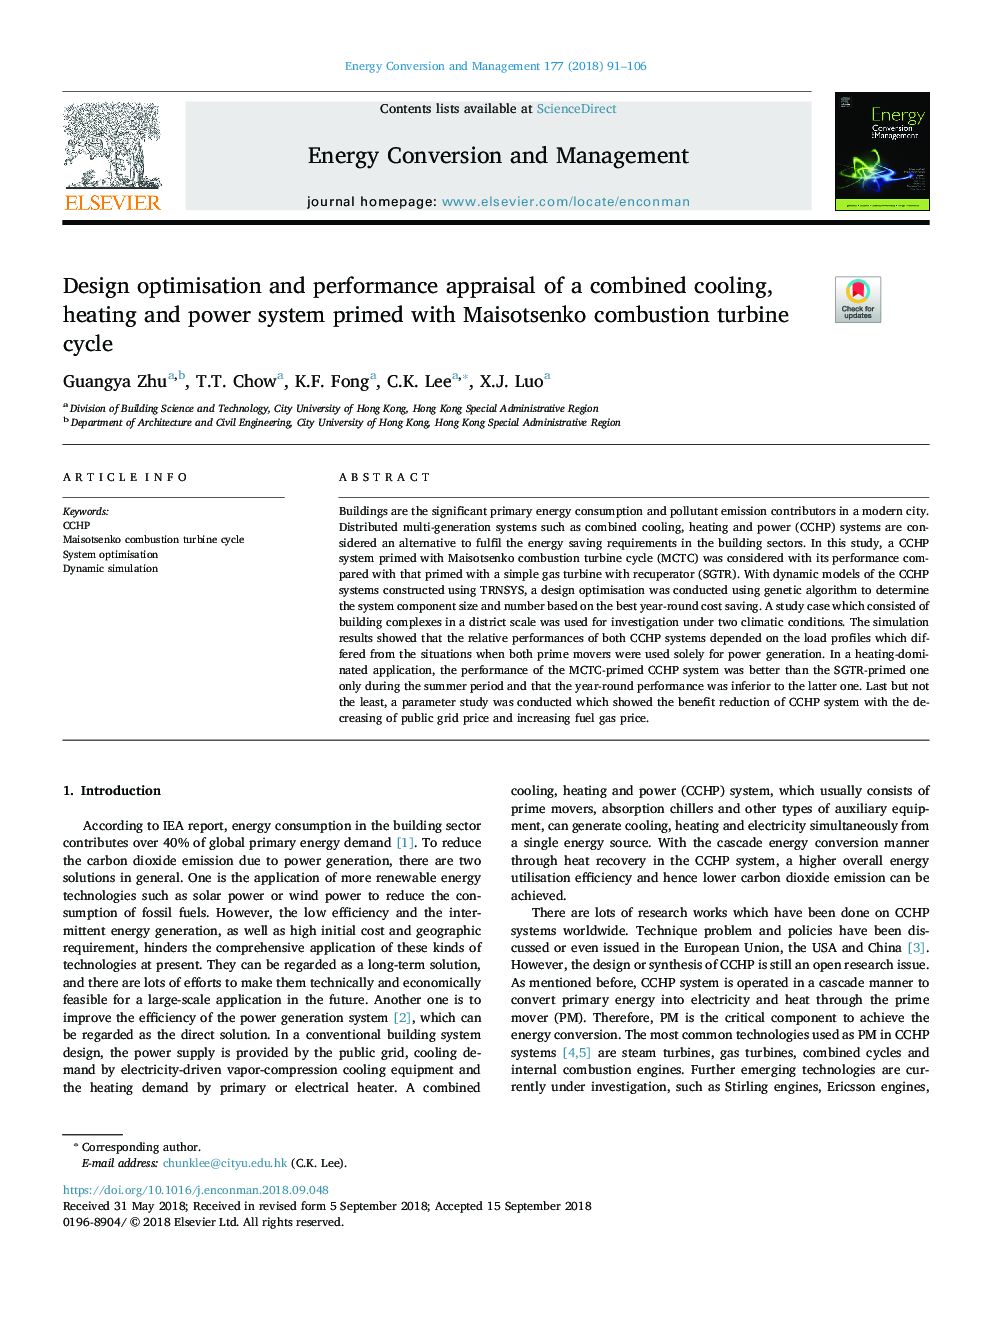 Design optimisation and performance appraisal of a combined cooling, heating and power system primed with Maisotsenko combustion turbine cycle